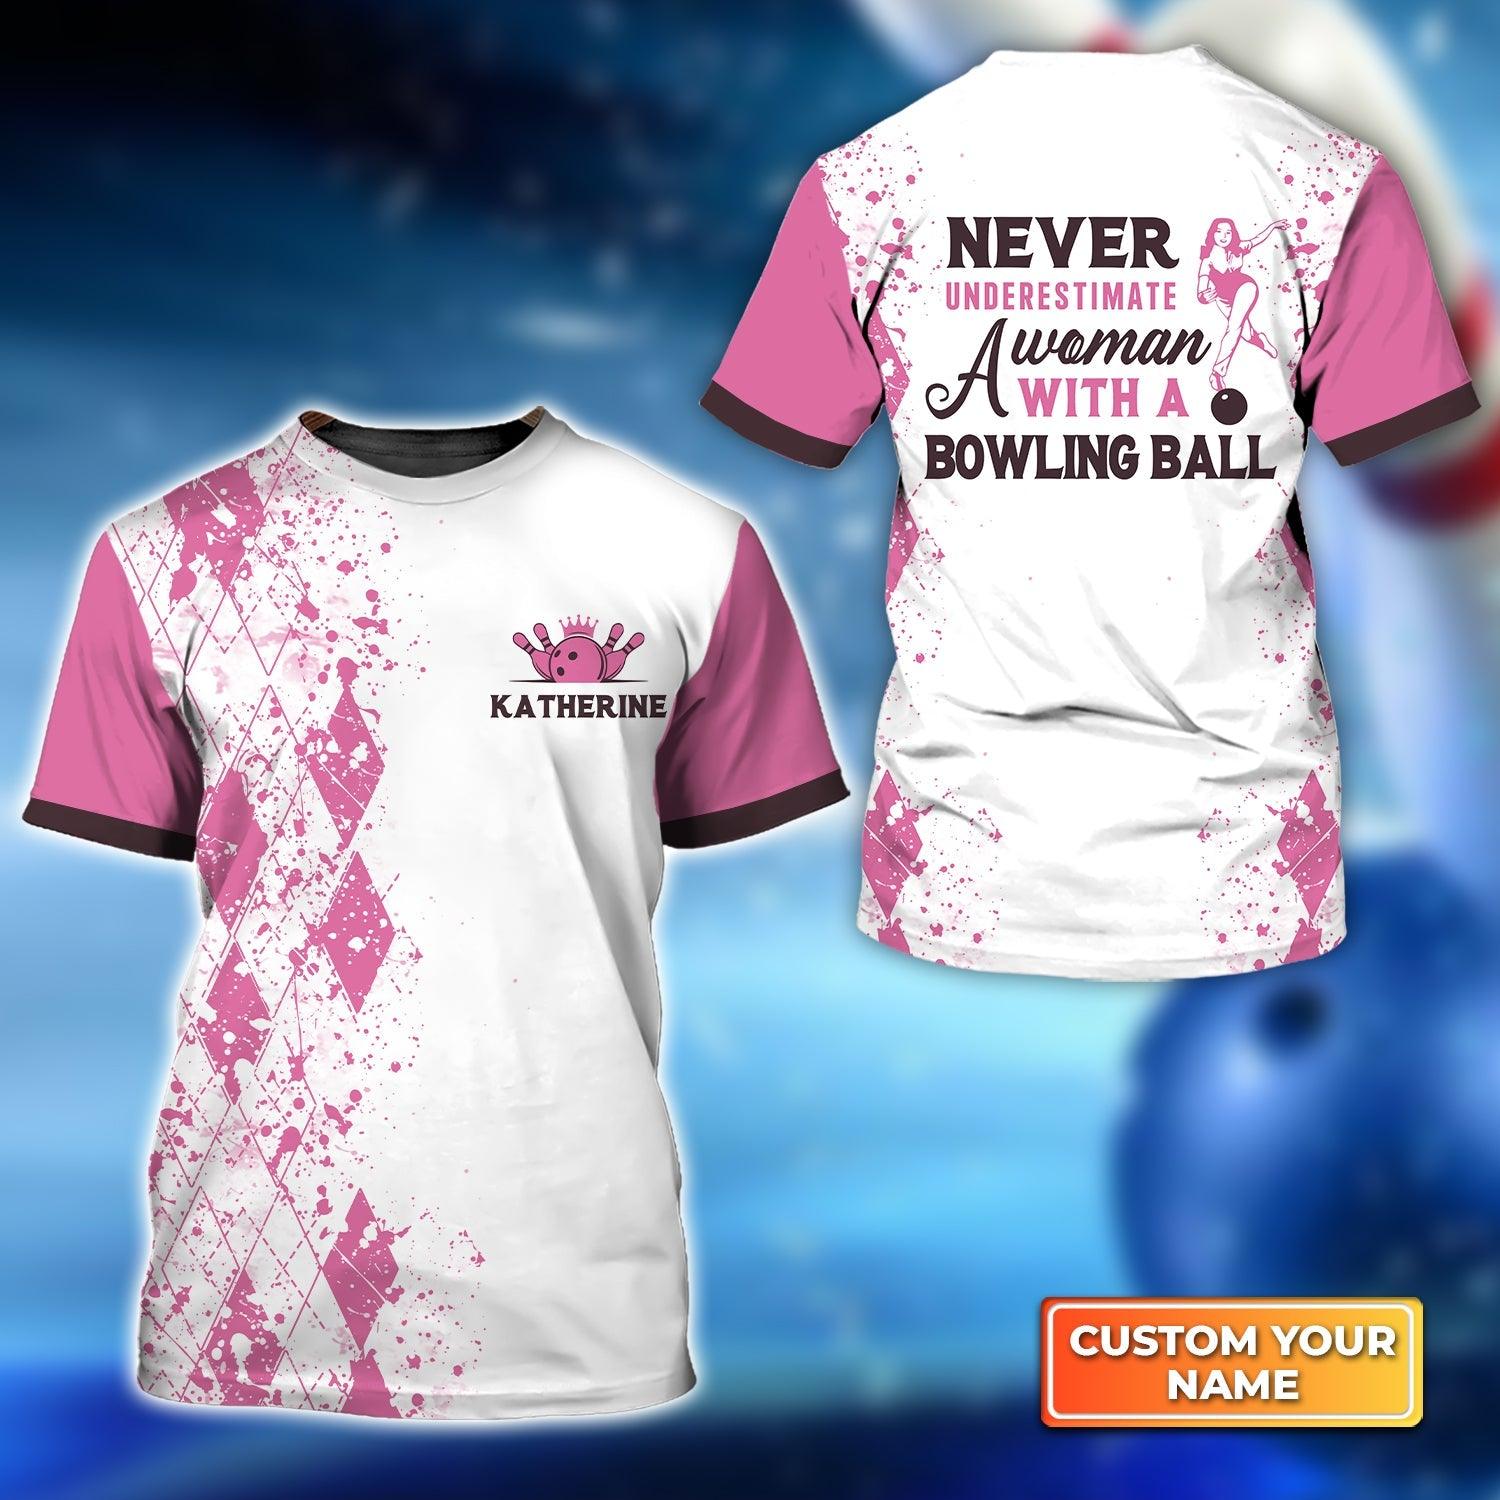 Bowling Custom Name T Shirt, Never Underestimate a Woman with a Bowling Ball, Pink Bowling Personalized T-Shirt For Men, Gift For Bowlers, Team - Amzanimalsgift